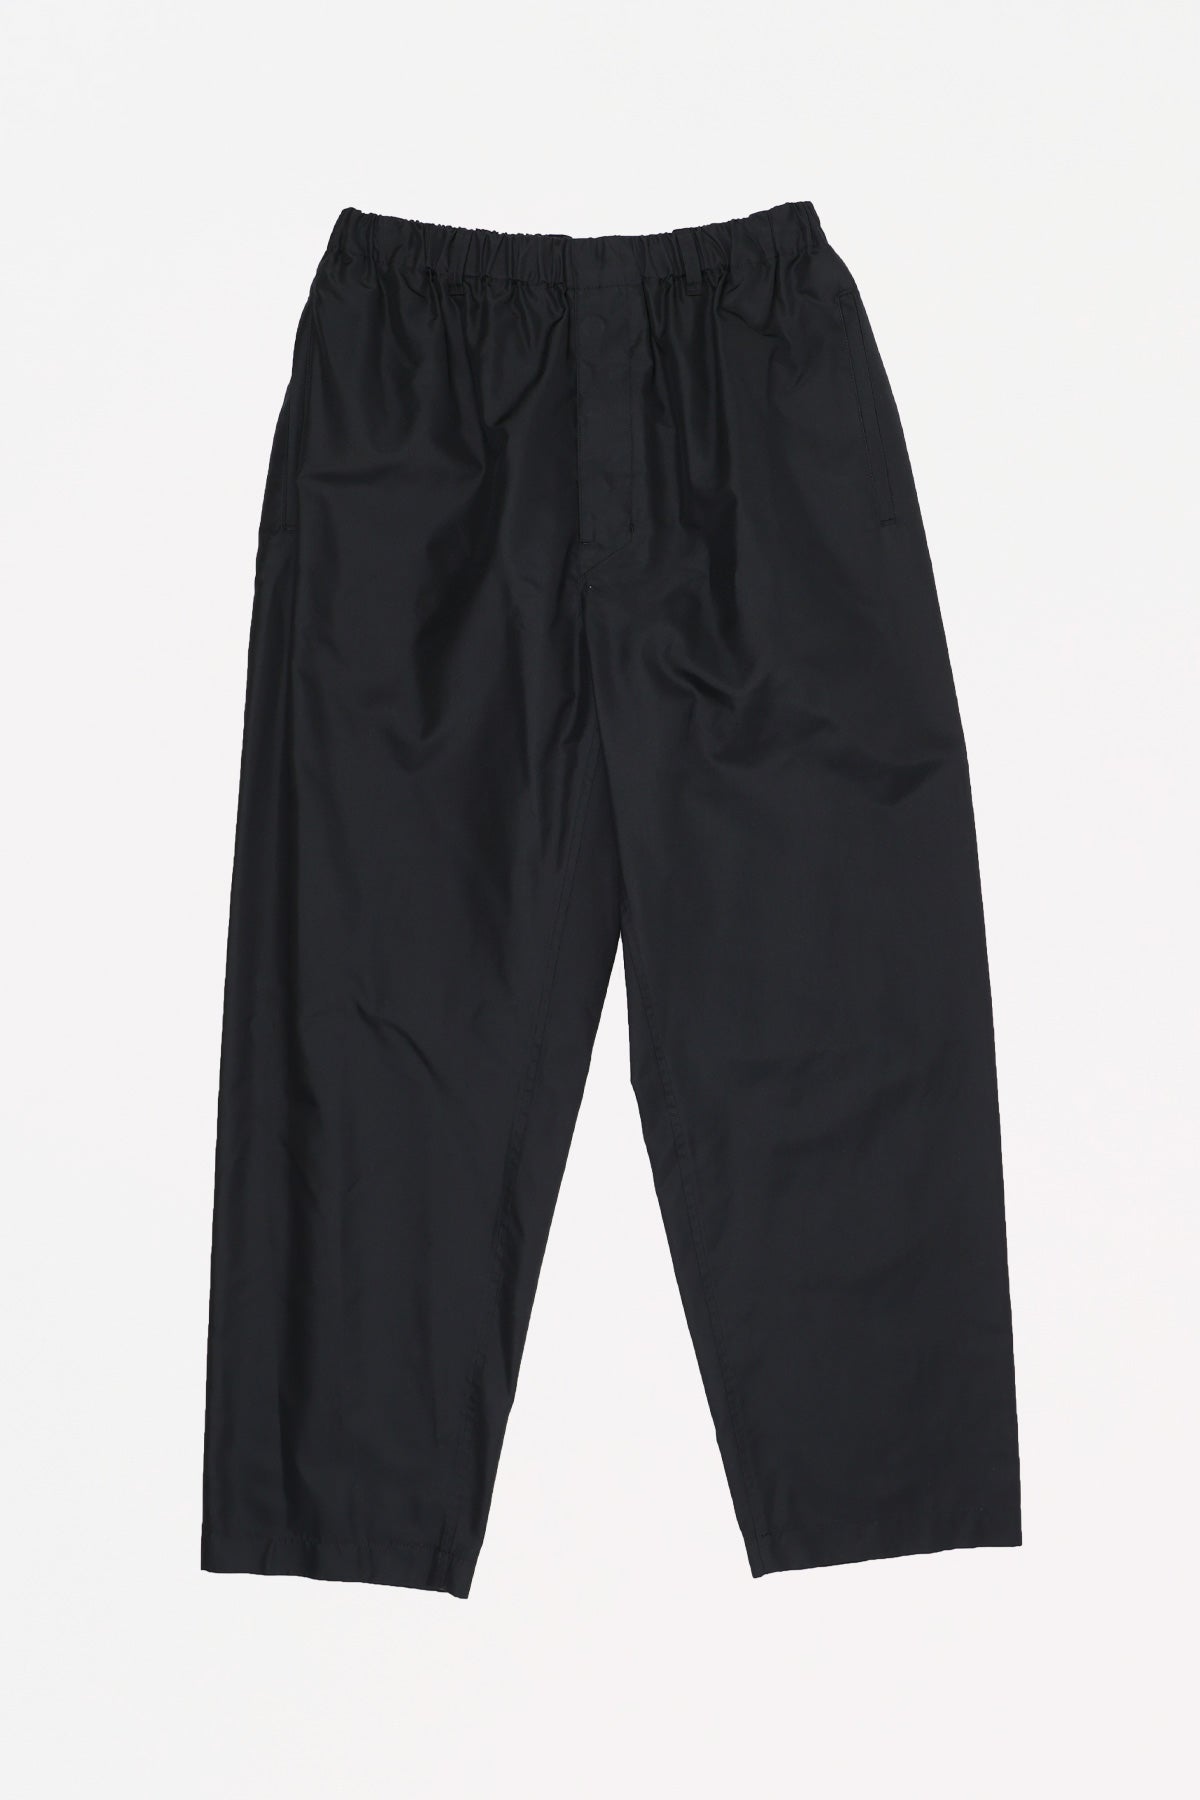 Lemaire Relaxed Pants | Ash Black | Canoe Club